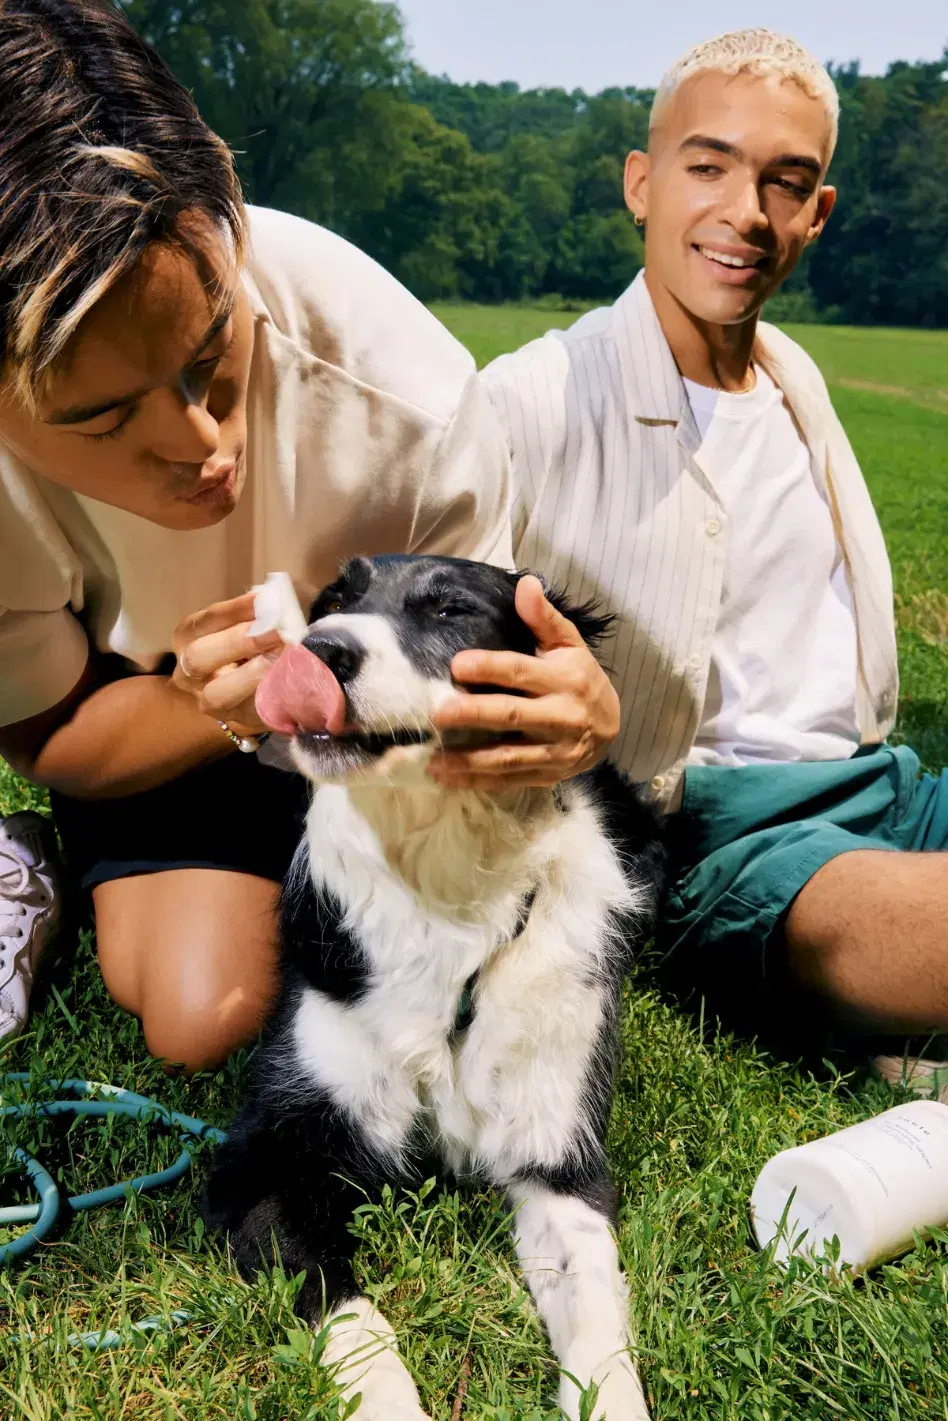 Two individuals sit on grass in a park; the person on the left wipes the face of a black and white dog while the other person sits beside them smiling.